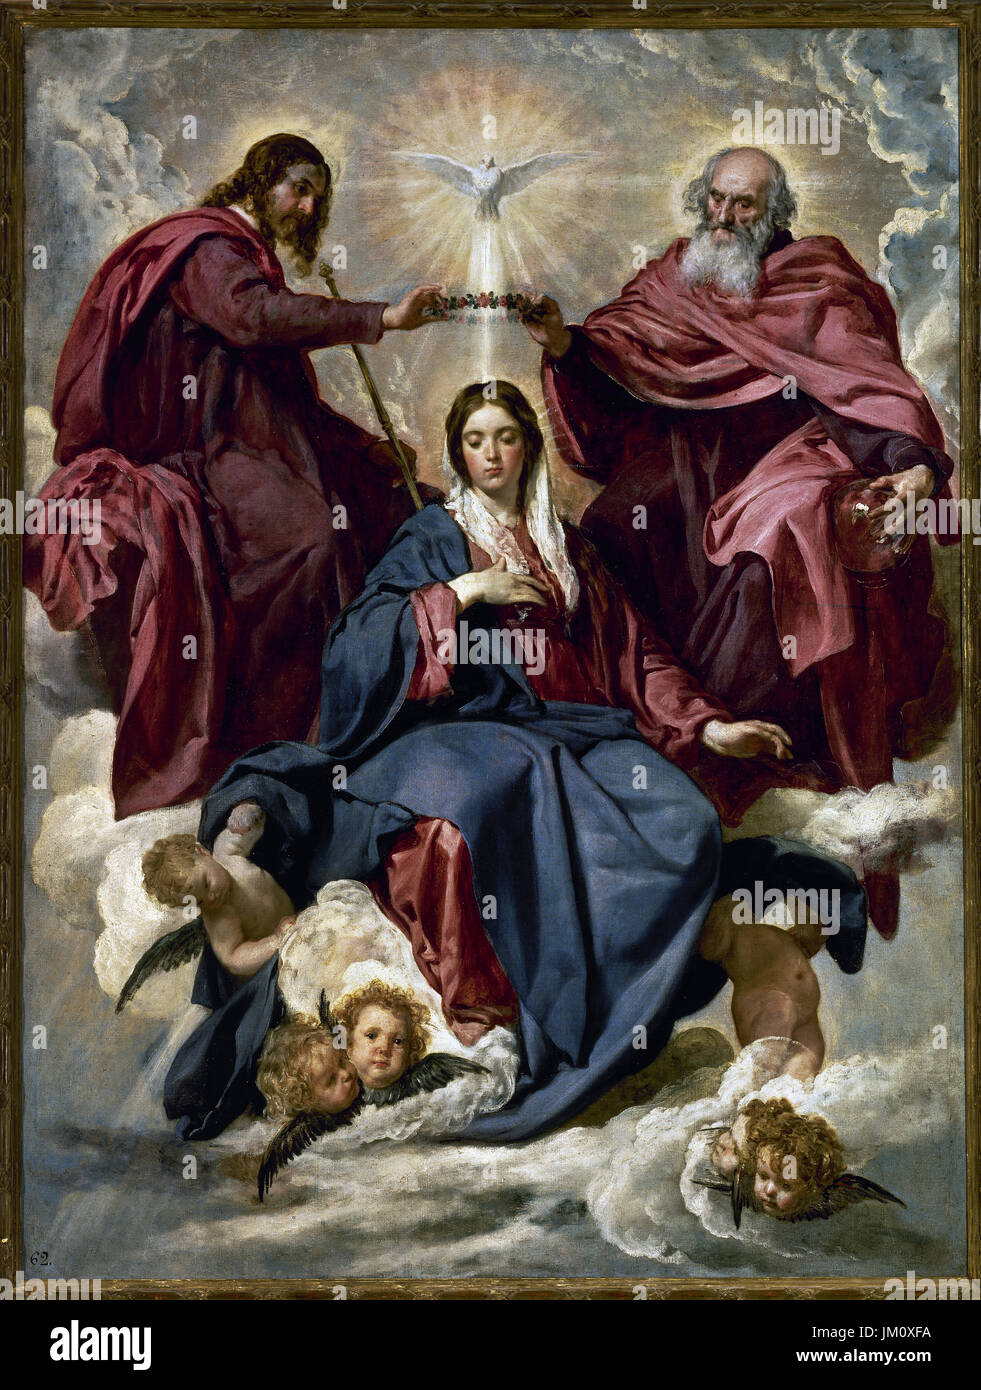 Diego Velázquez (1599-1660). Spanish painter. The Coronation of the Virgin, 1635-1636. From right to left, the Eternal Father, Jesus, the Holy Spirit and the Virgin surrounded by cherubs. Prado Museum. Madrid. Spain. Stock Photo